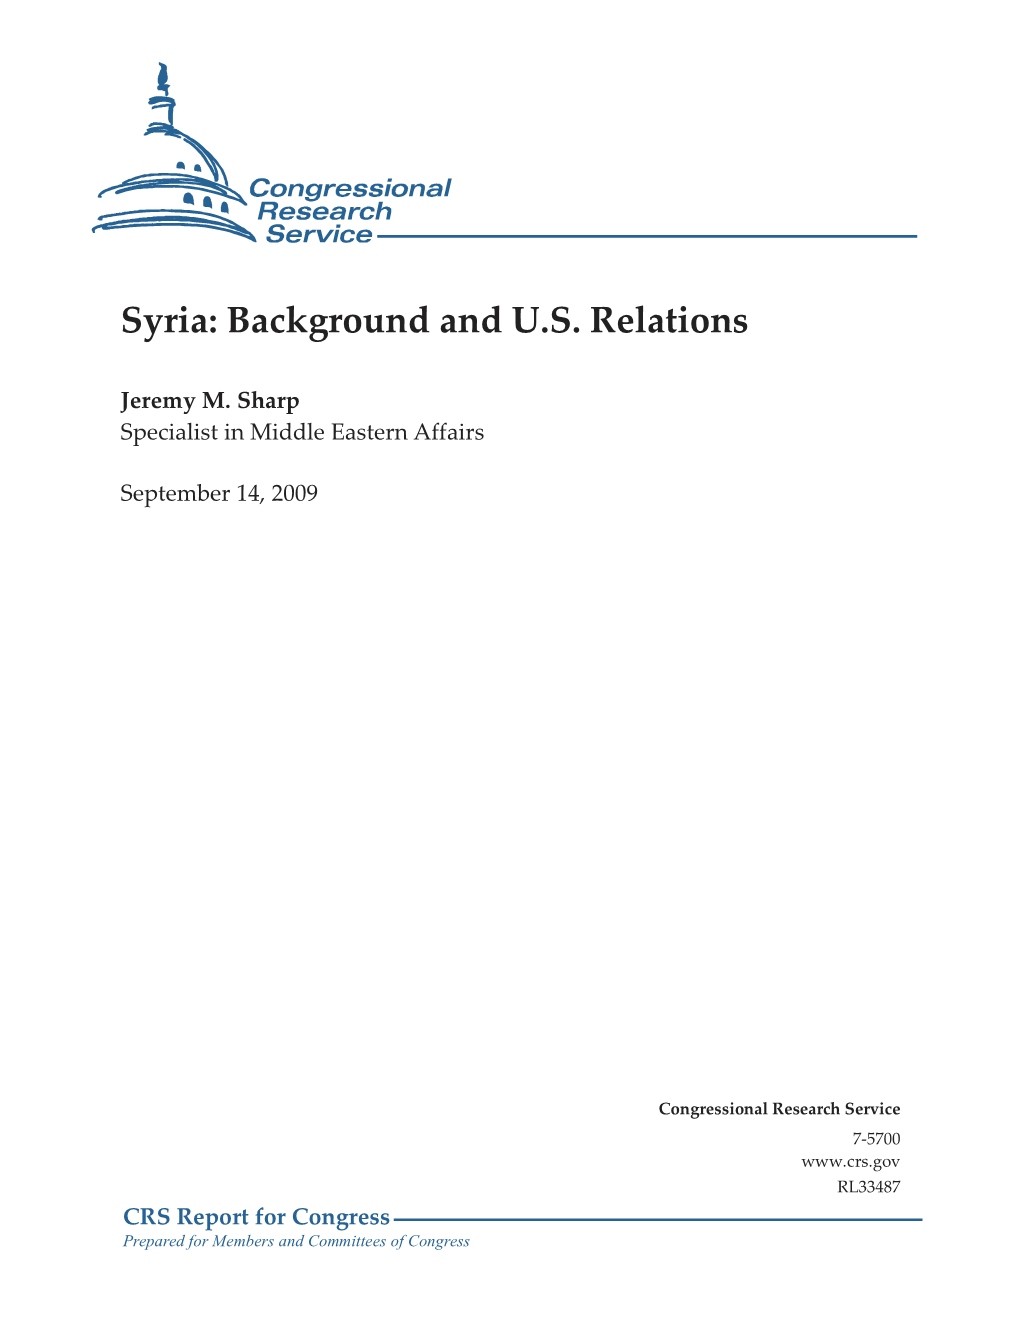 Syria: Background and U.S. Relations